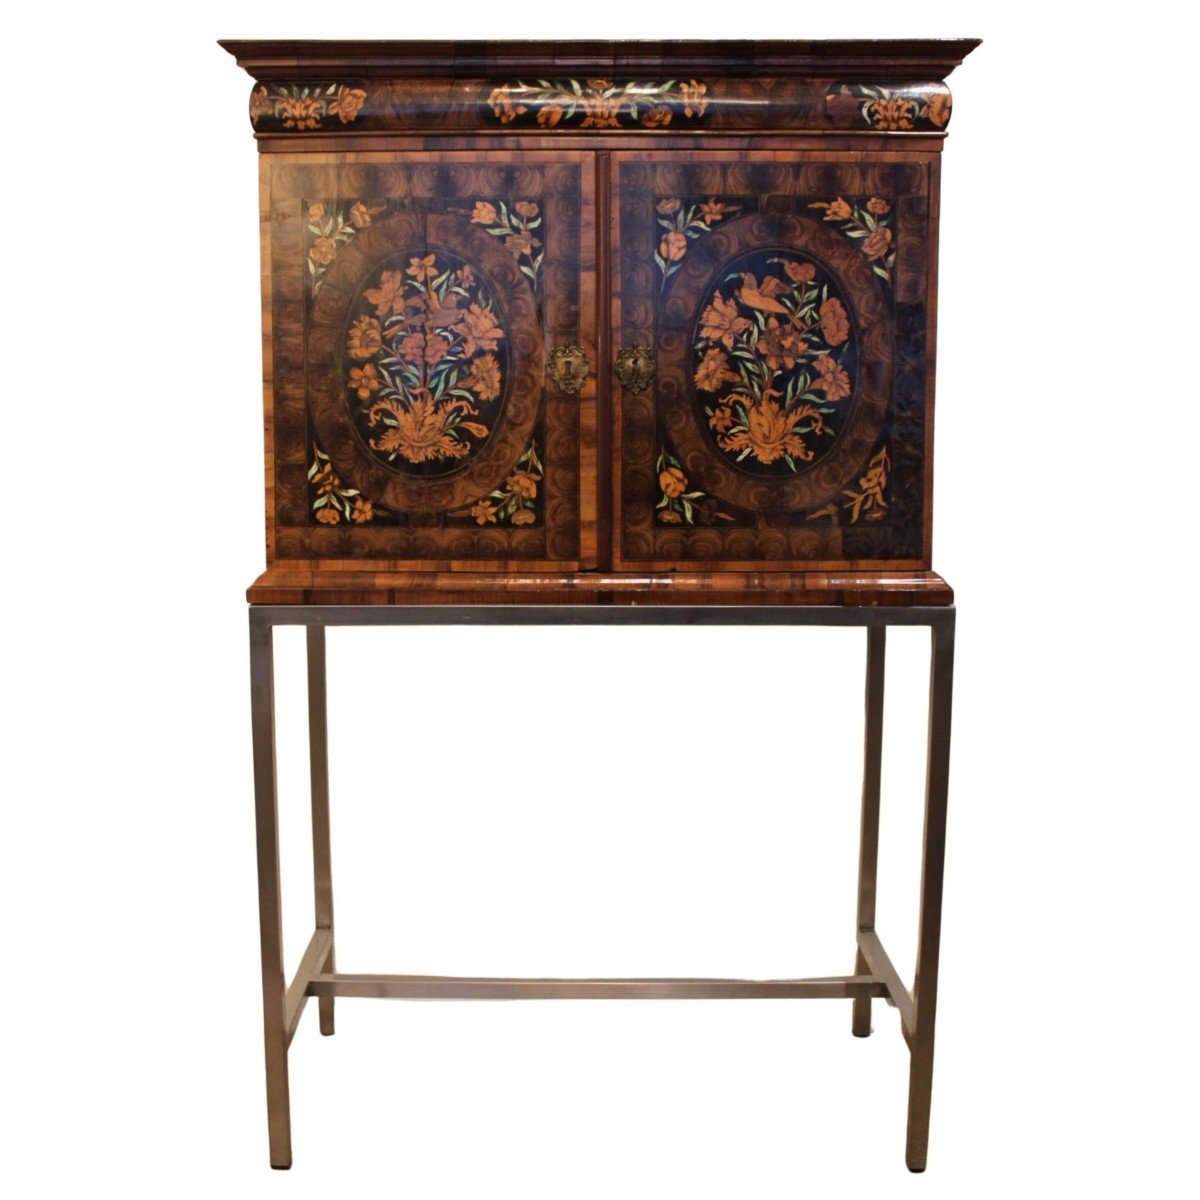 Marquetry Cabinet, Late 18th Century